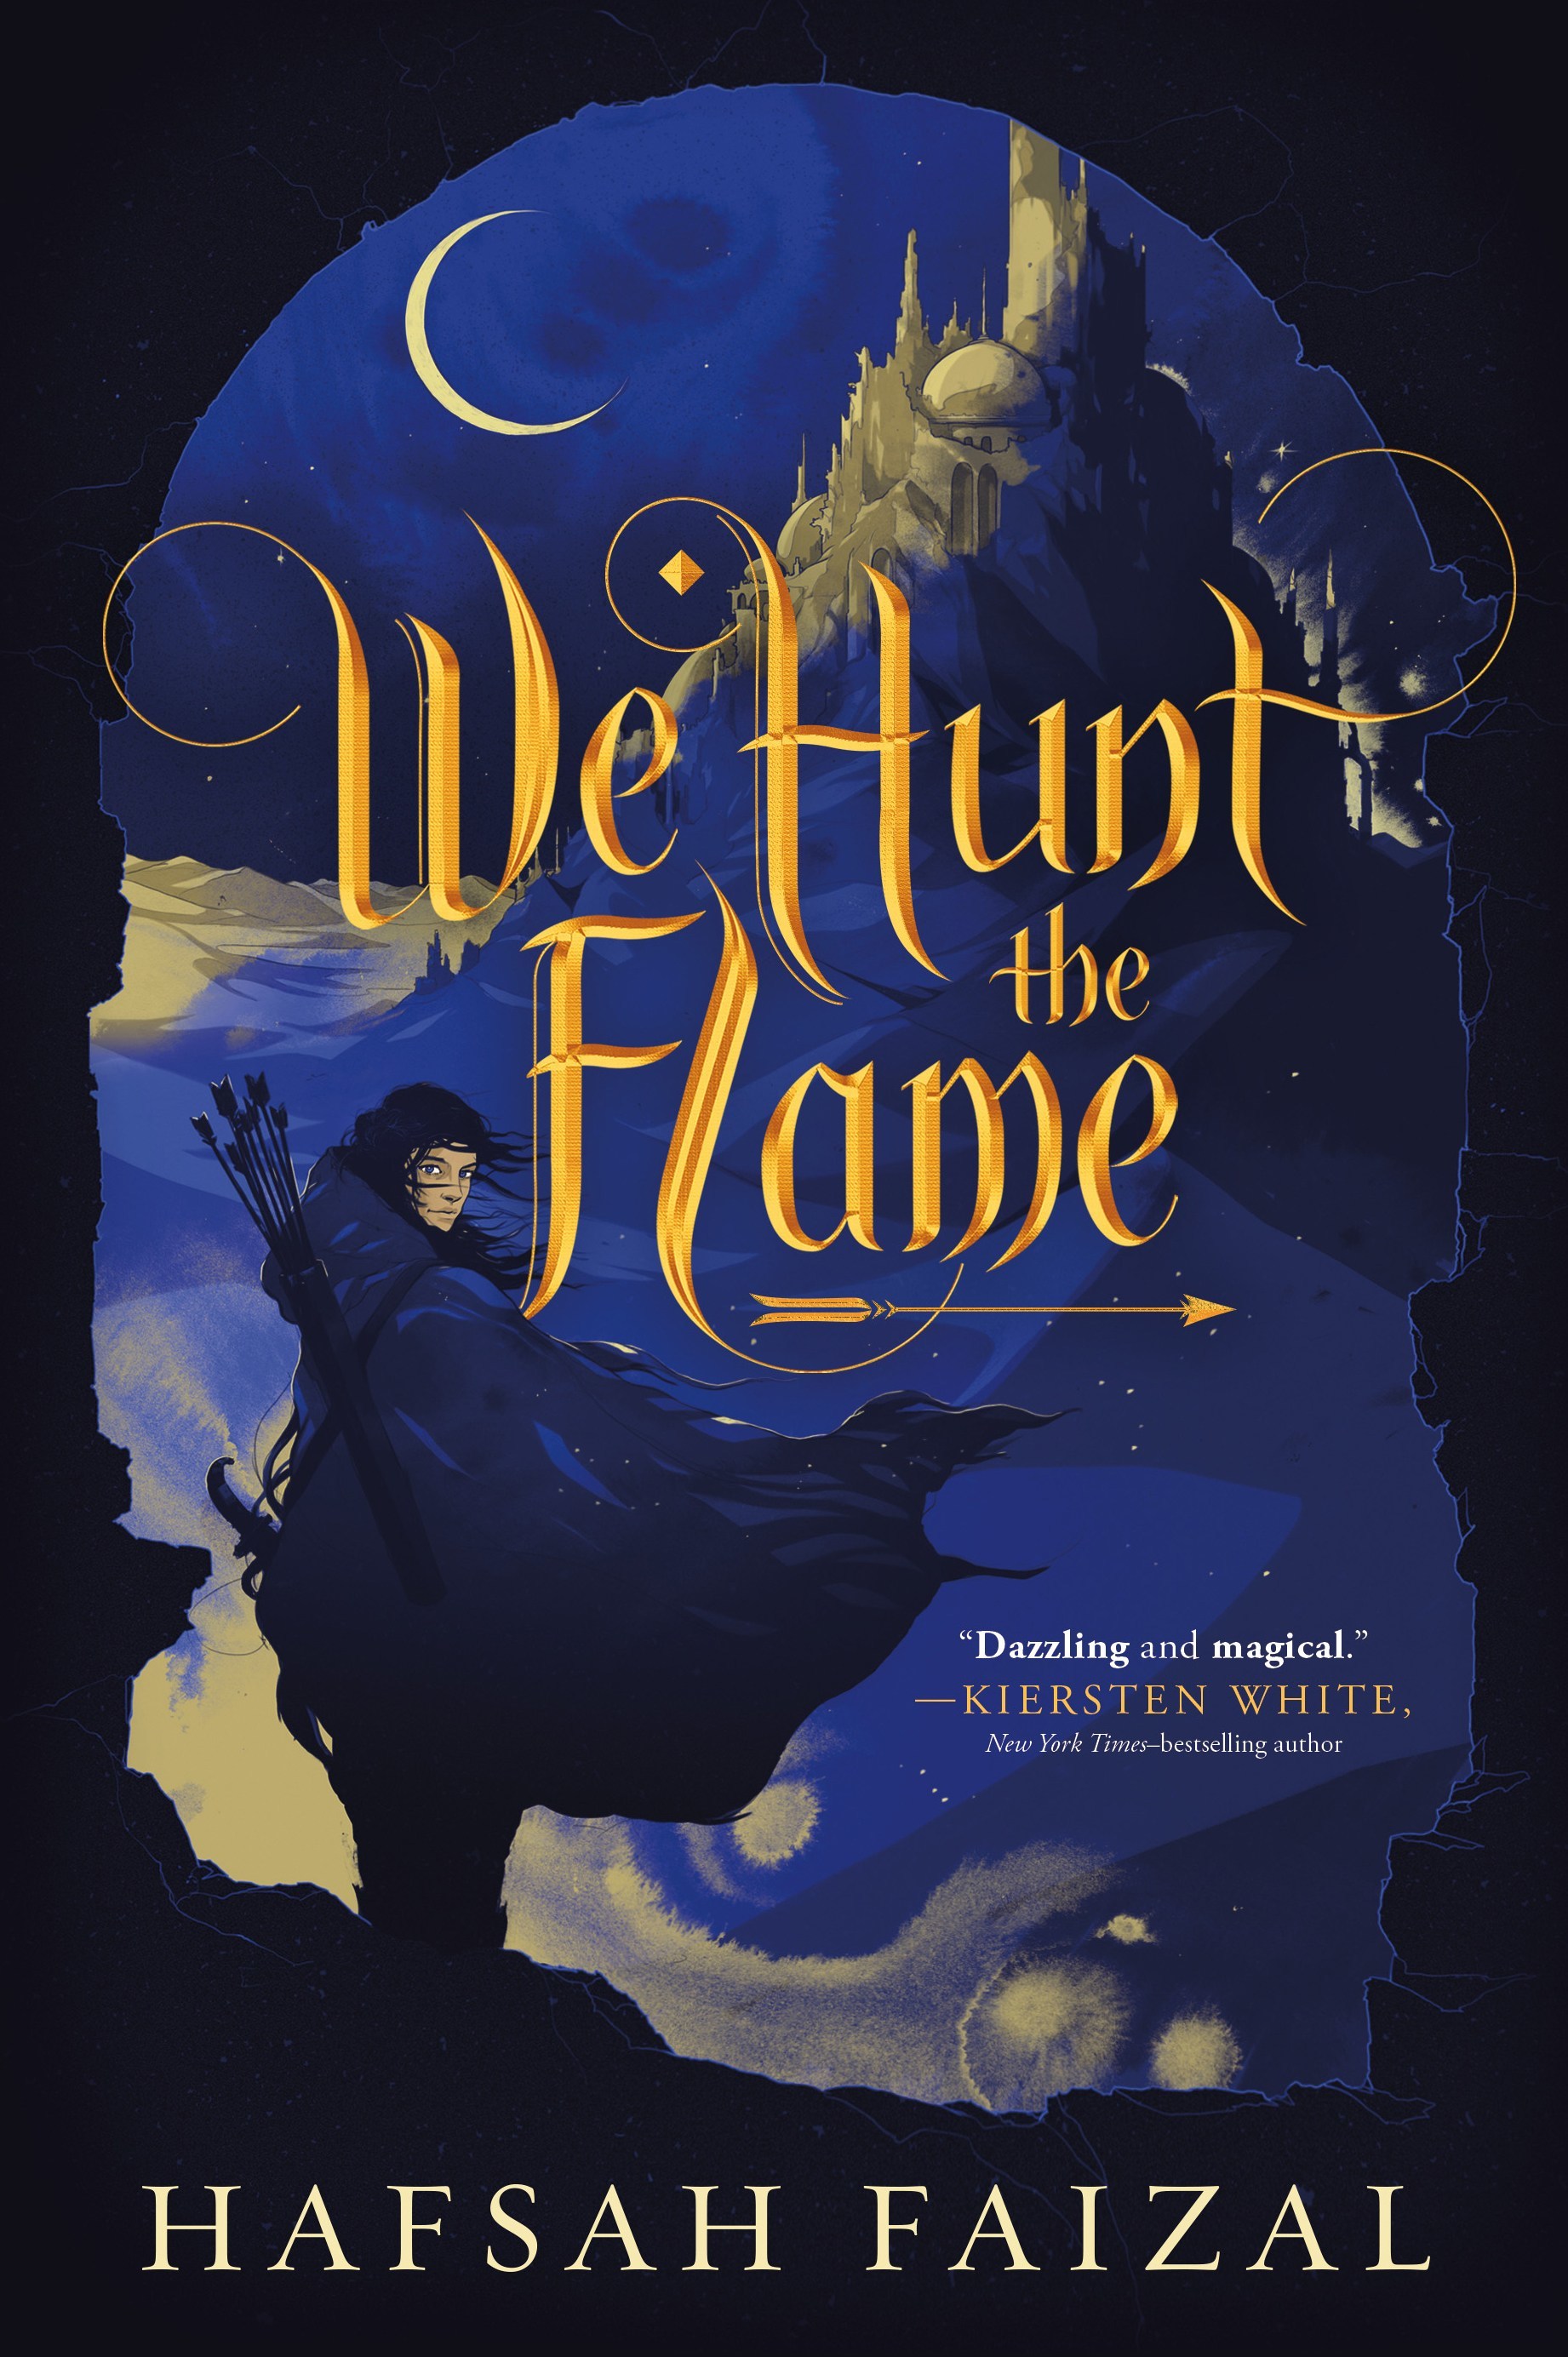 Image shown is the book cover for We Hunt the Flame by Hafsah Faizal 